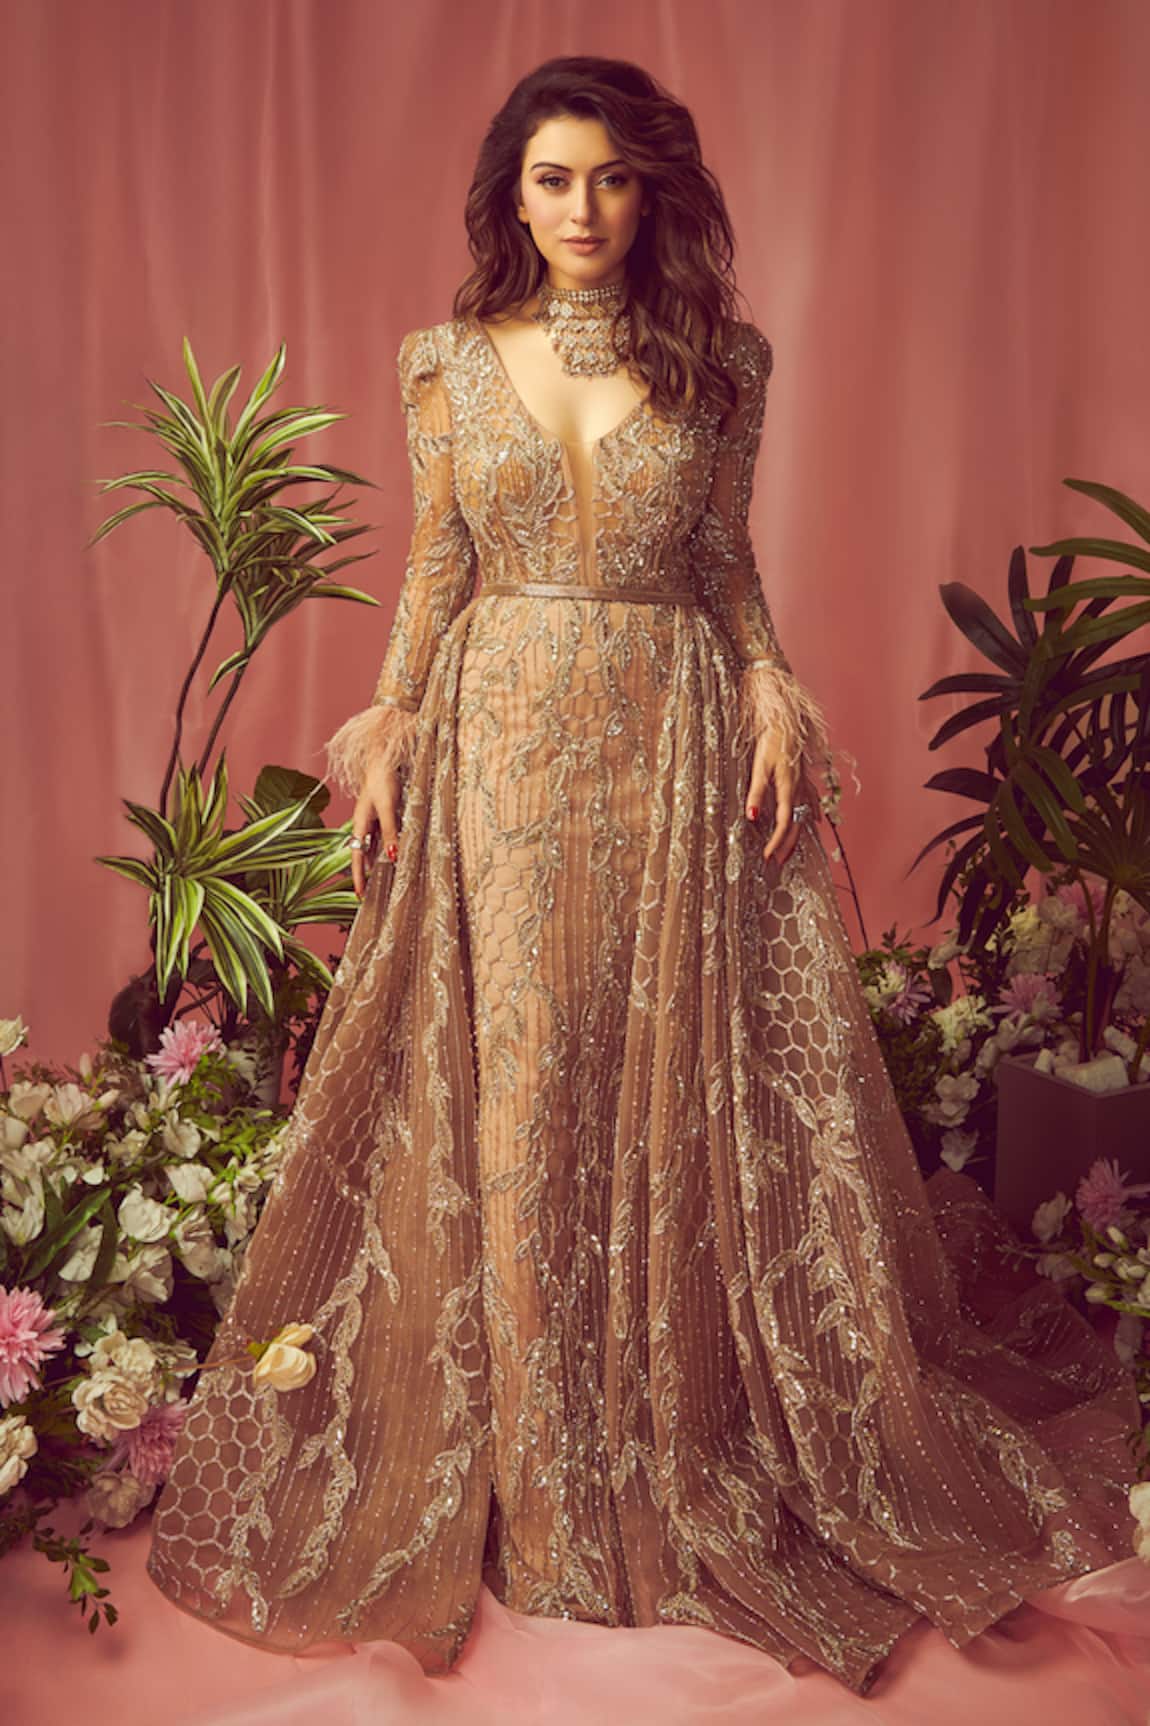 Amit GT Floral Embroidered Trail Gown